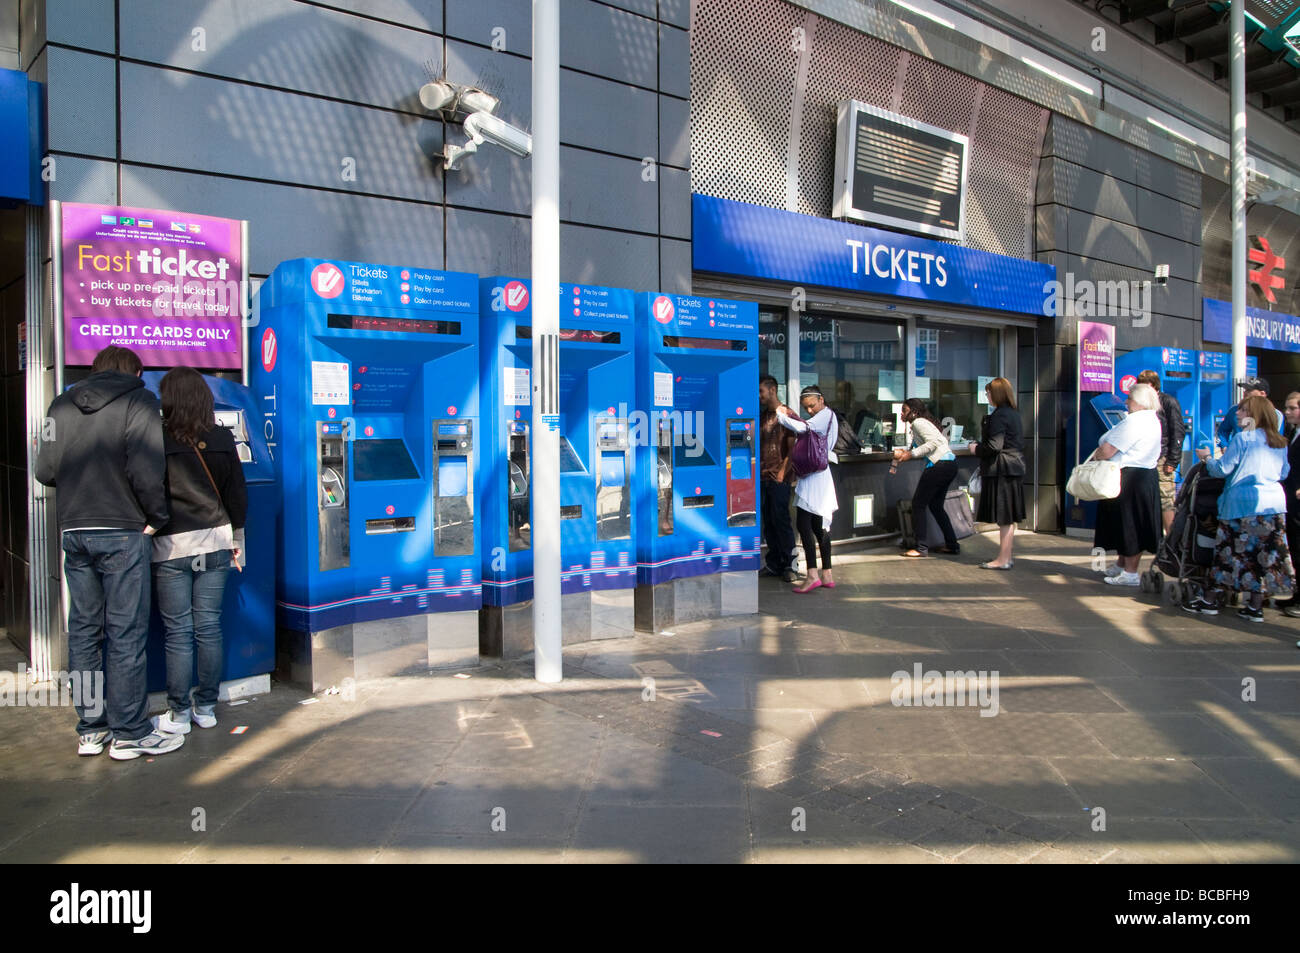 UK.COMMUTERS BUYING TICKETS AT FINSBURY PARK STATION,LONDON Photo Julio Etchart Stock Photo